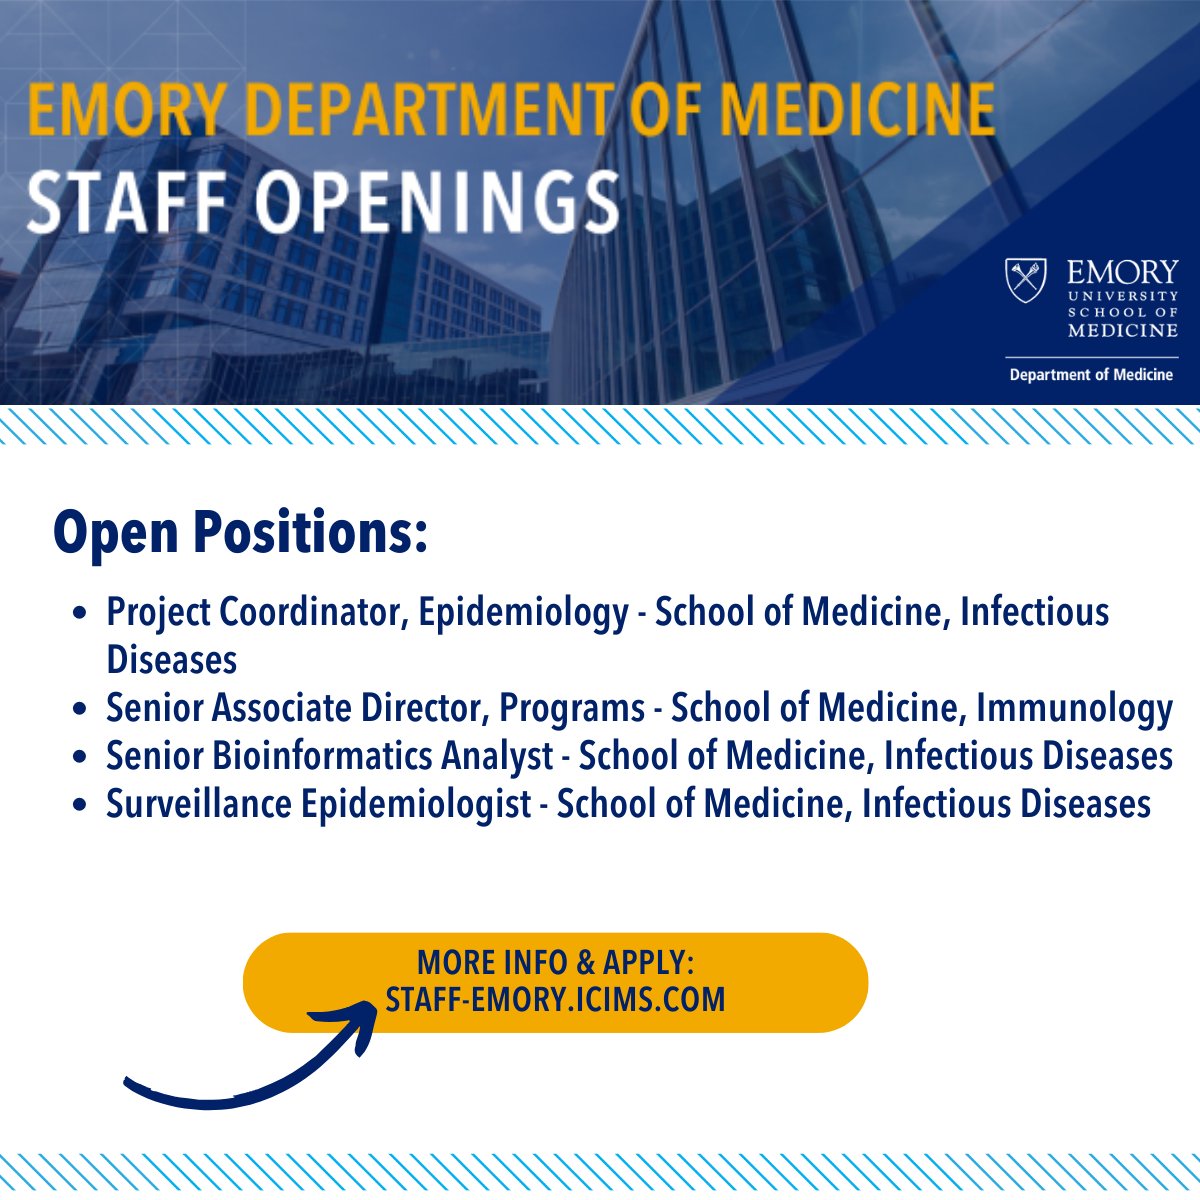 🔔JOB ALERT! Emory Department of Medicine is hiring. Check out the latest staff openings with our #infectiousdiseases and #rheumatology & #immunology teams! Learn more and apply 👉linktr.ee/emorydeptofmed